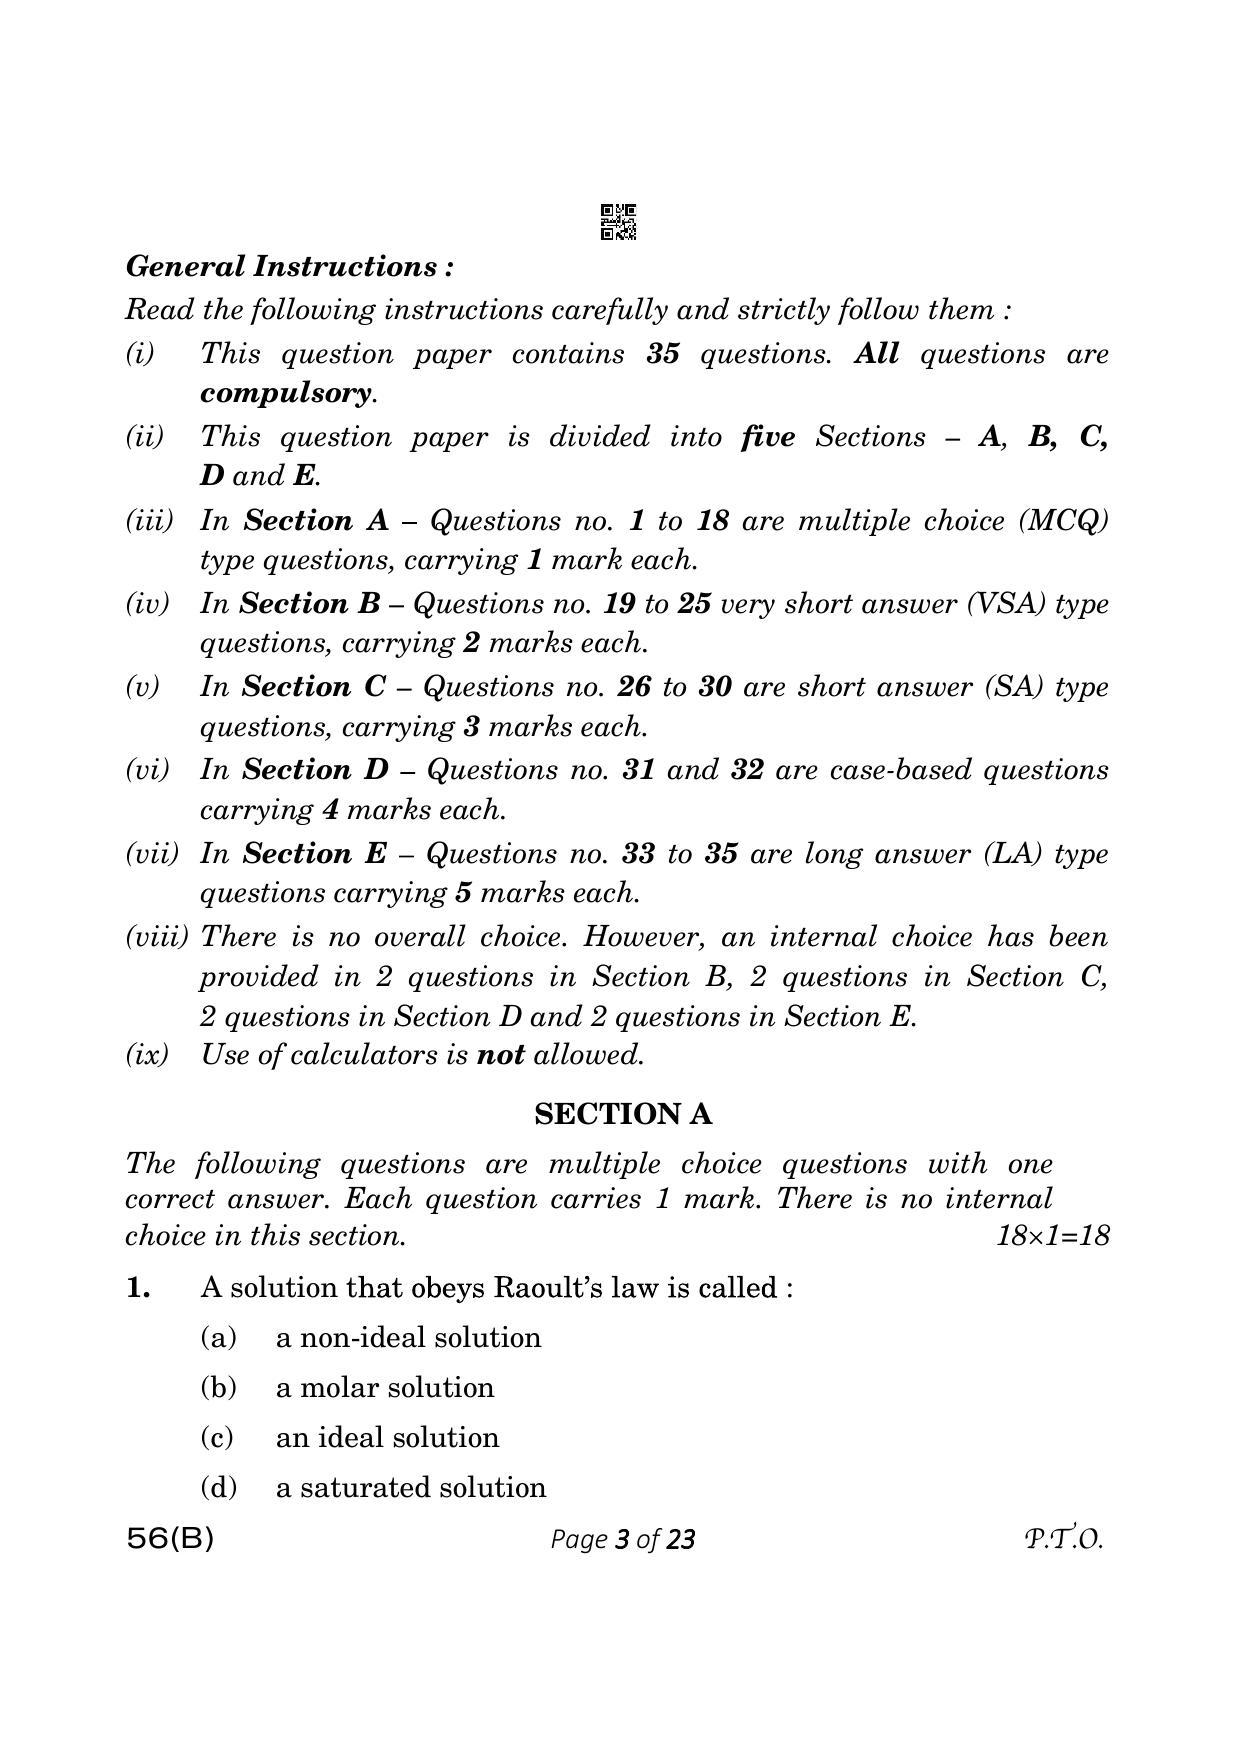 CBSE Class 12 56-B Chemistry 2023 (Compartment) Question Paper - Page 3